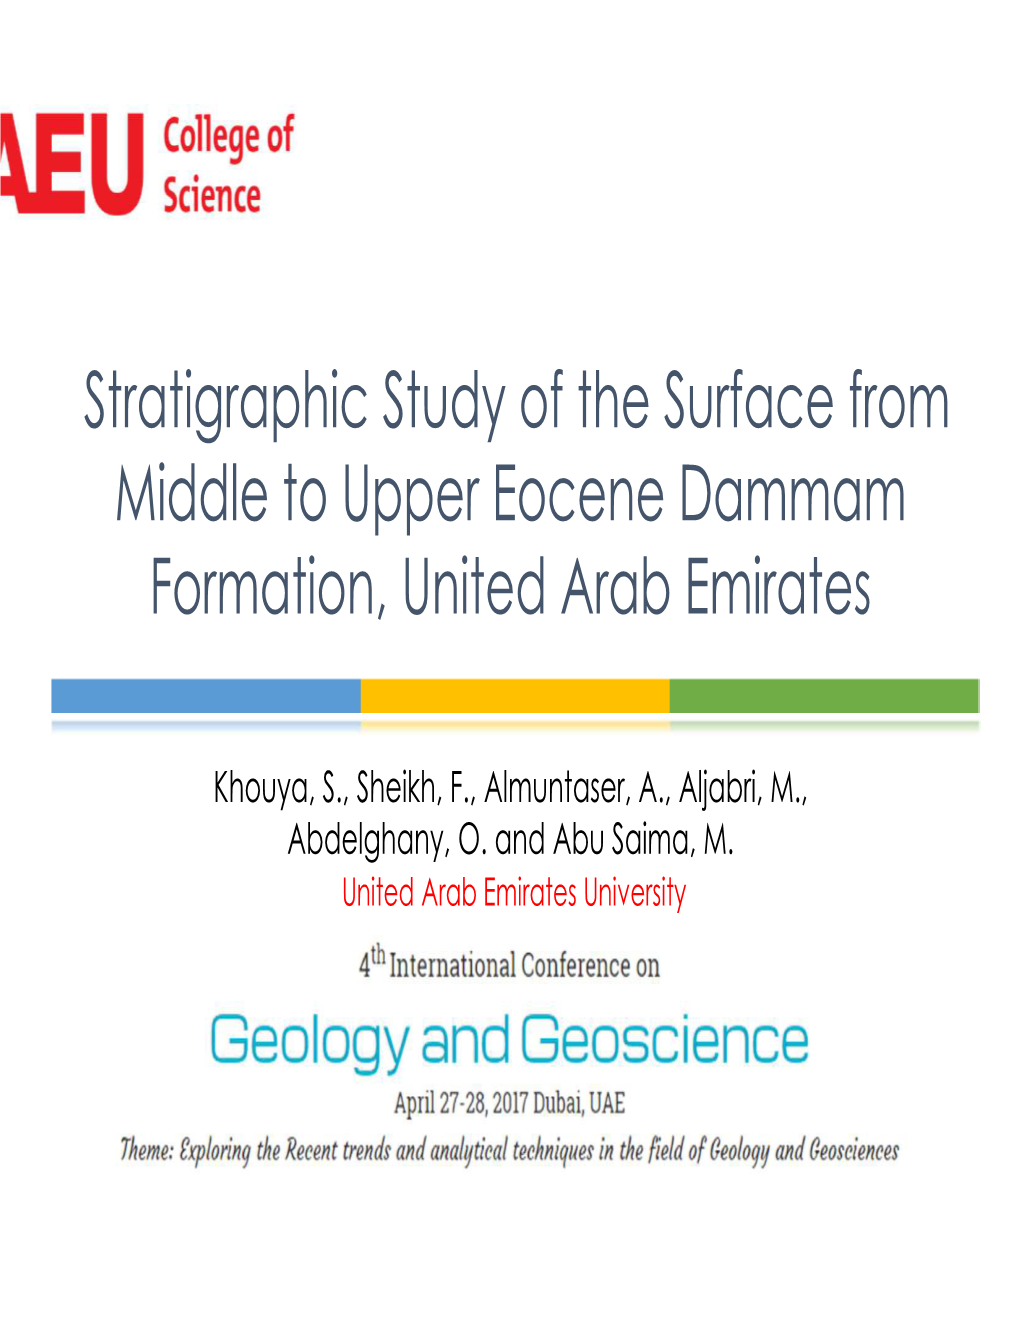 Stratigraphic Study of the Surface from Middle to Upper Eocene Dammam Formation, United Arab Emirates